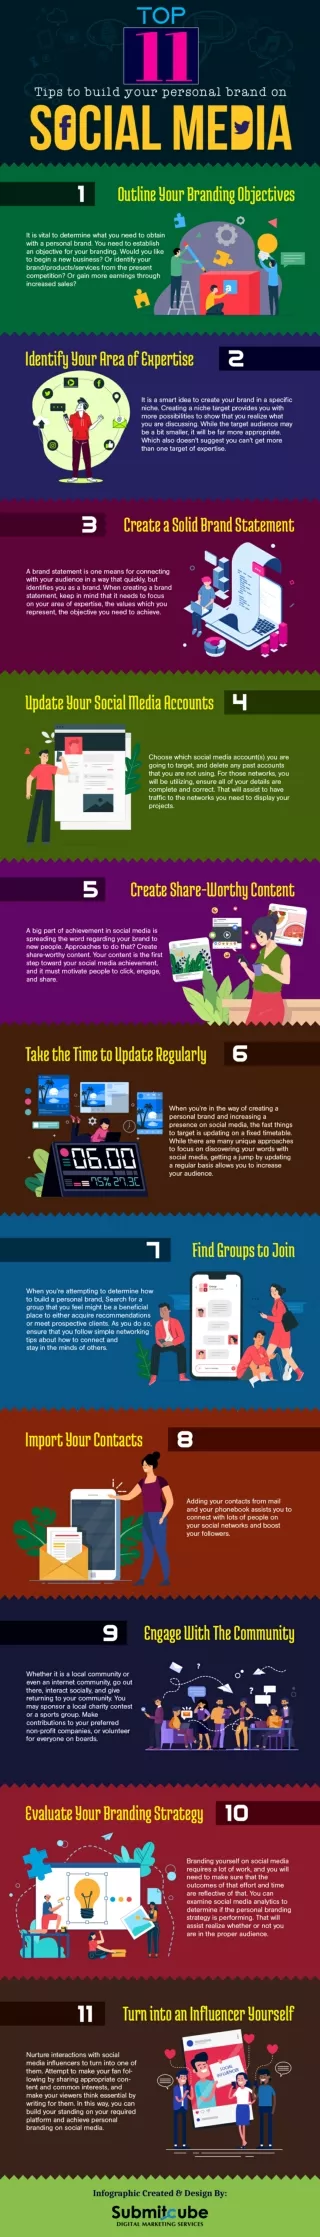 Top 11 Tips to build your personal brand on social media [Infographic]